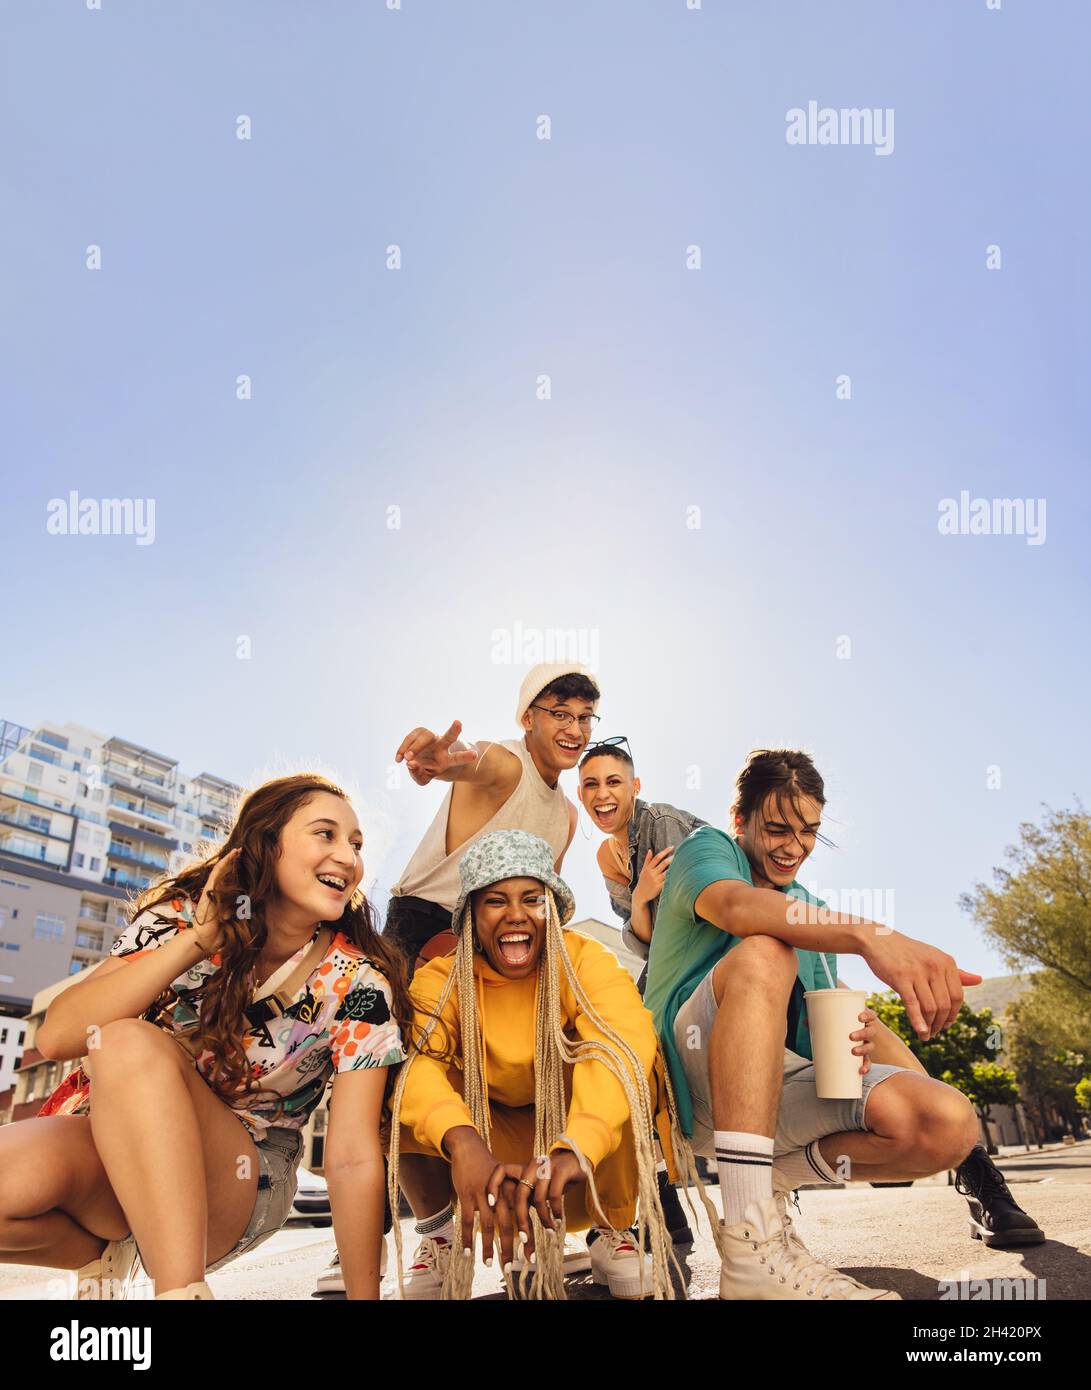 Diverse group of friends having fun in the city. Group of multiethnic generation z friends enjoying spending time together. Cheerful young friends mak Stock Photo